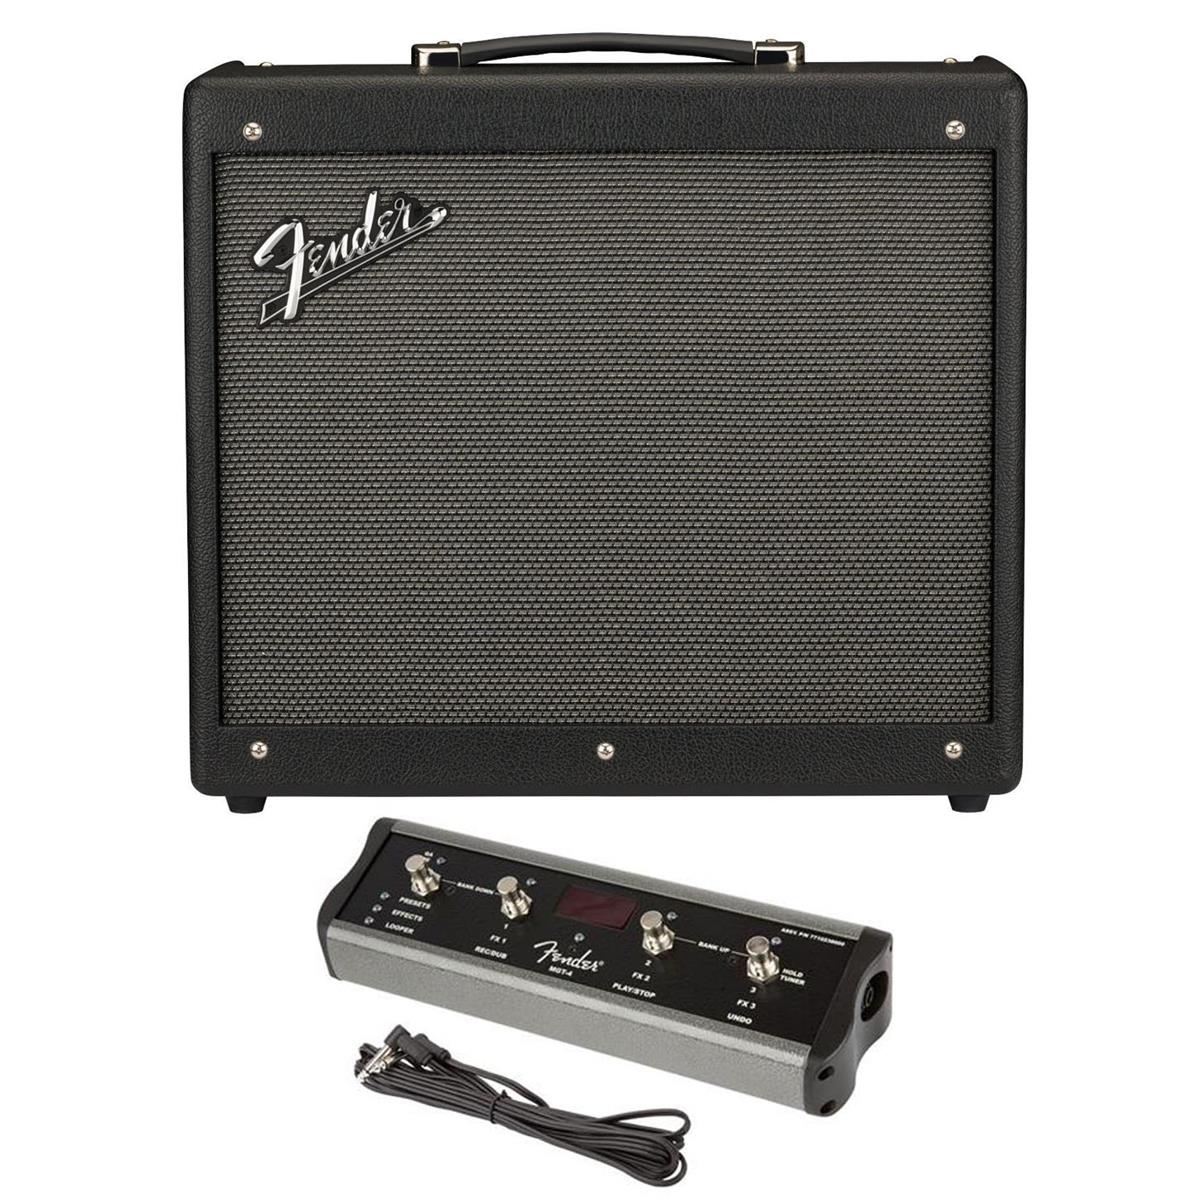 Image of Fender Mustang GTX50 120V Guitar Amplifier with MGT-4 Mustang GT Footswitch